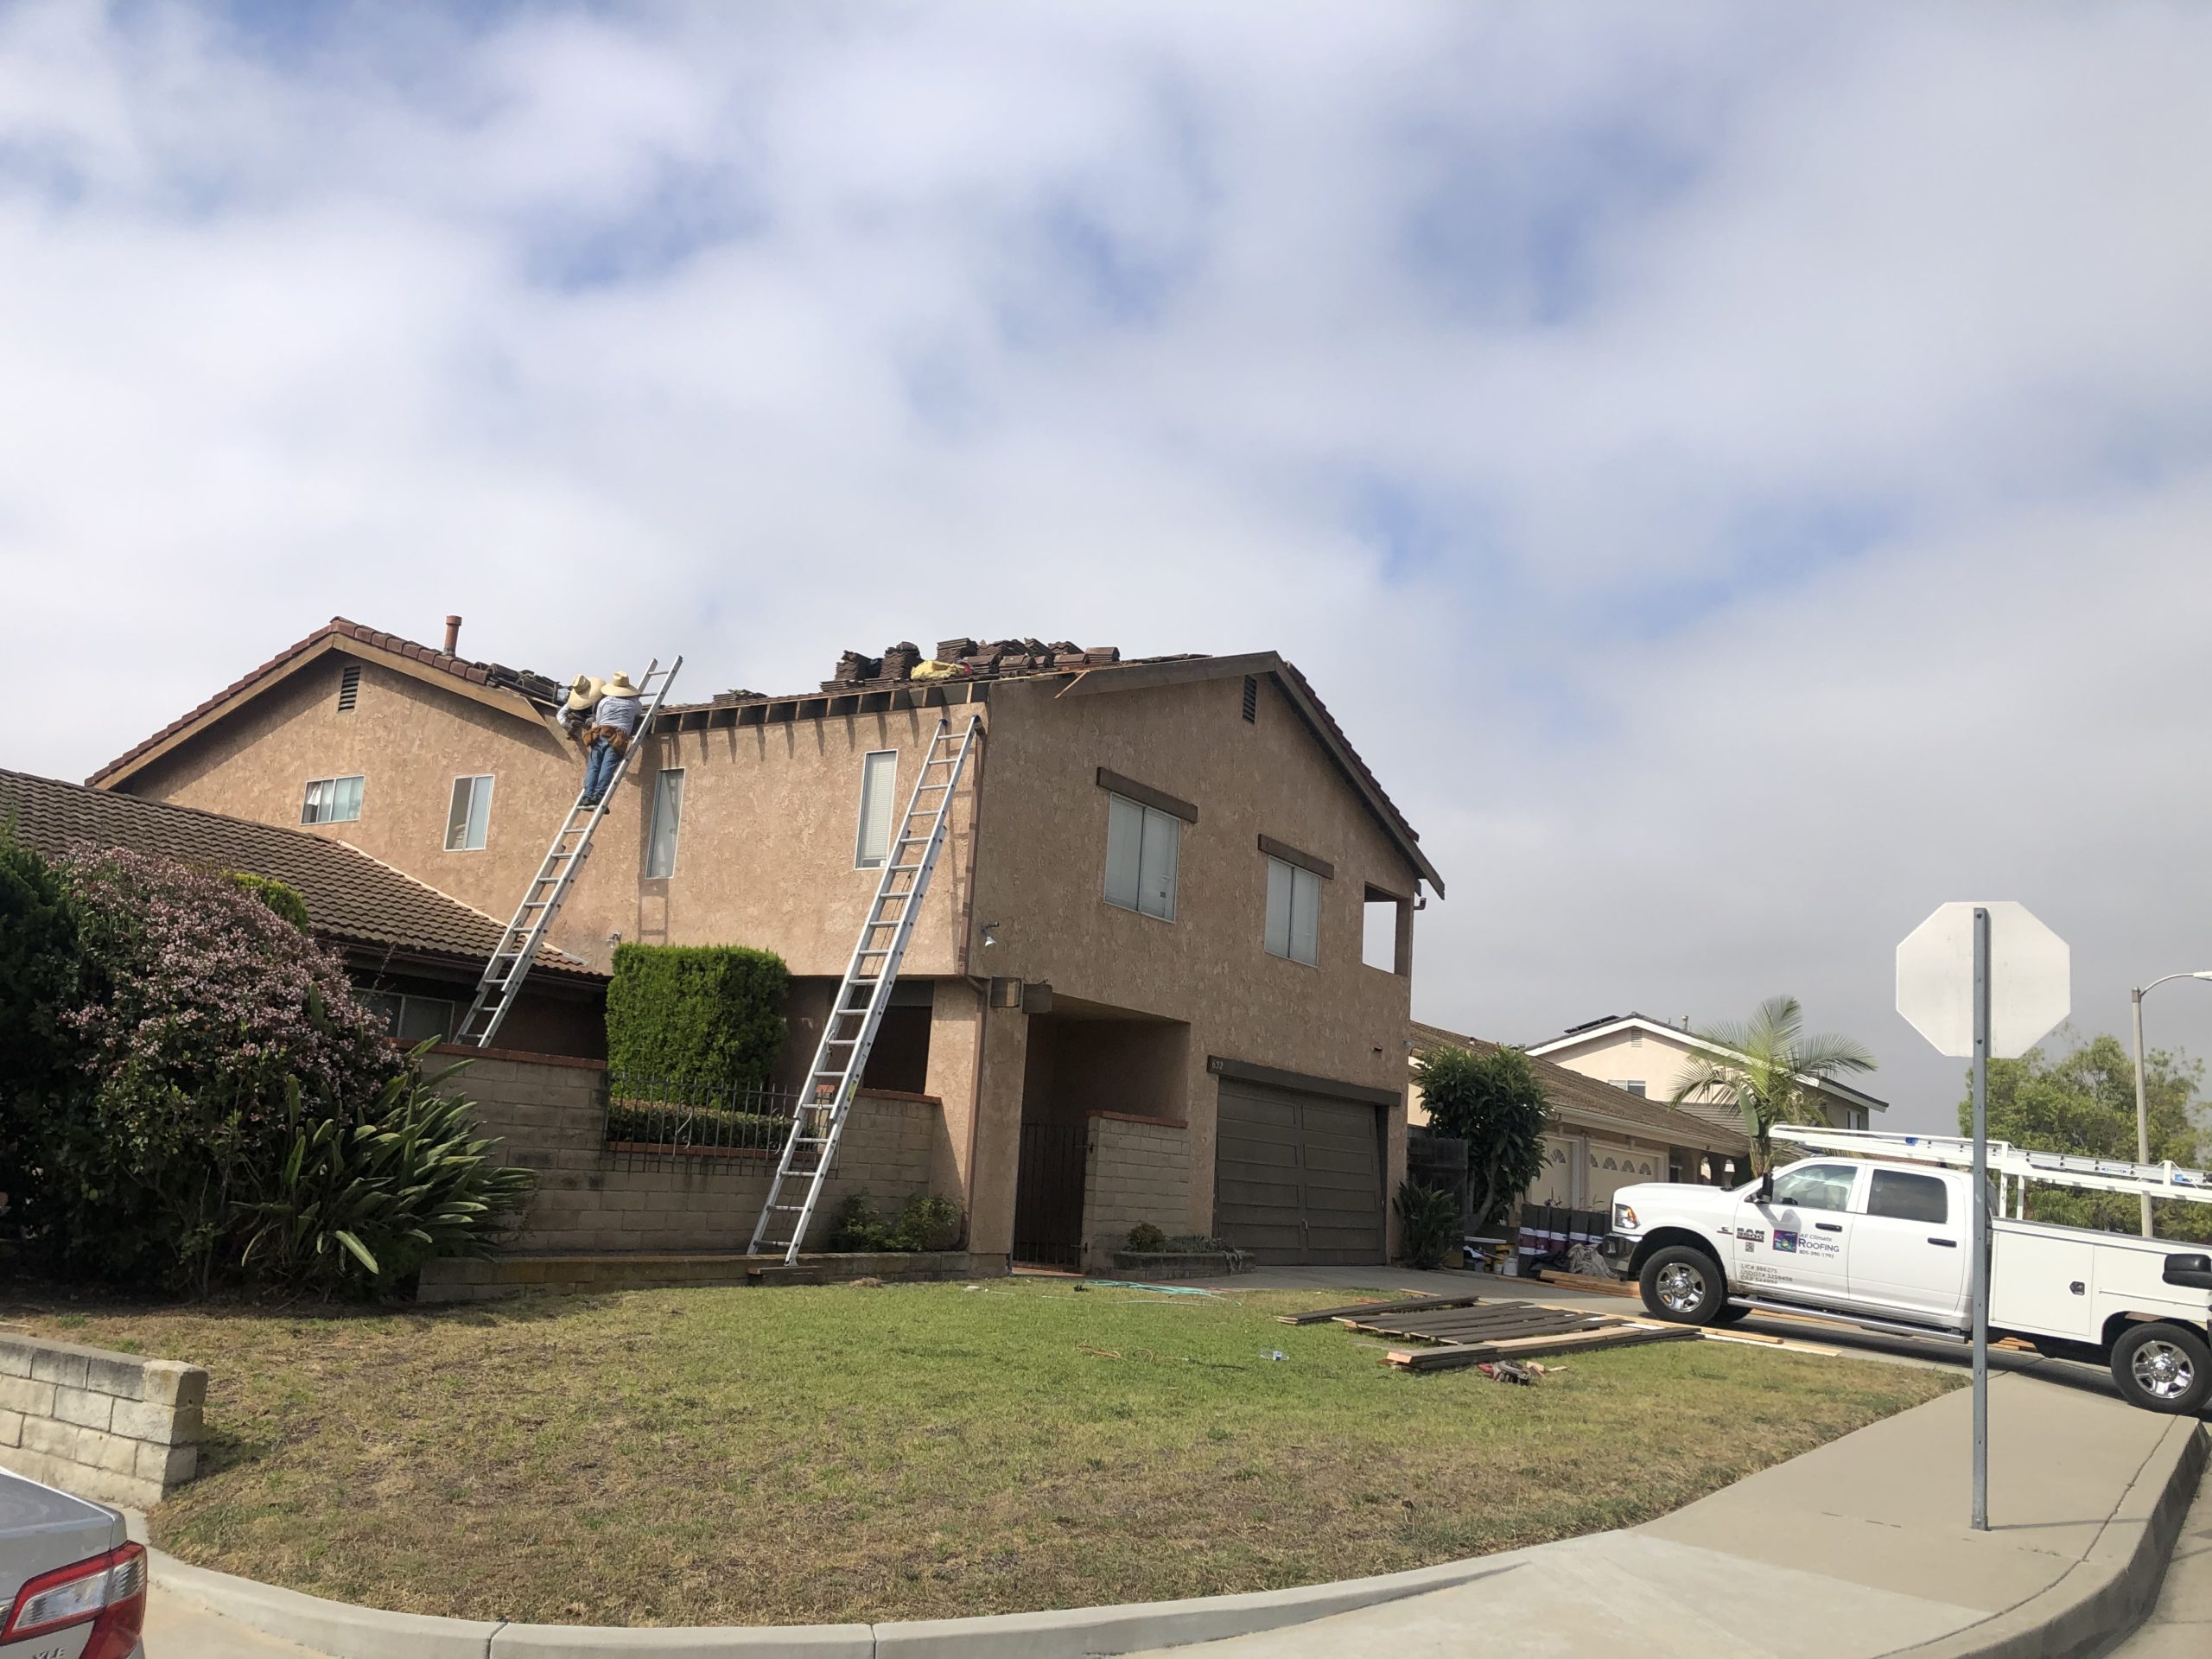 Roof Inspection in Ventura County - All Climate Roofing